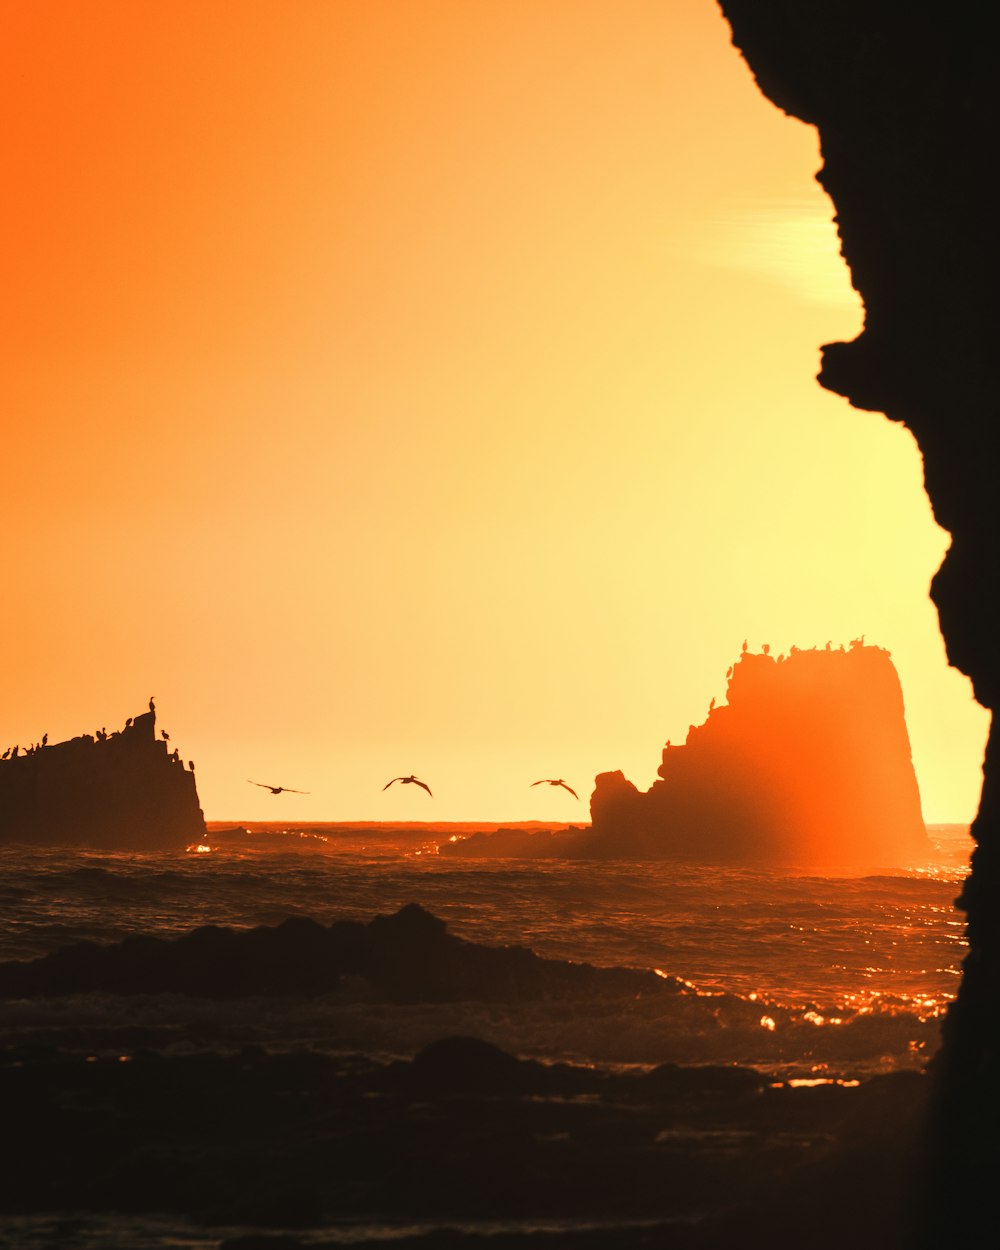 silhouette of person on rock formation near body of water during sunset